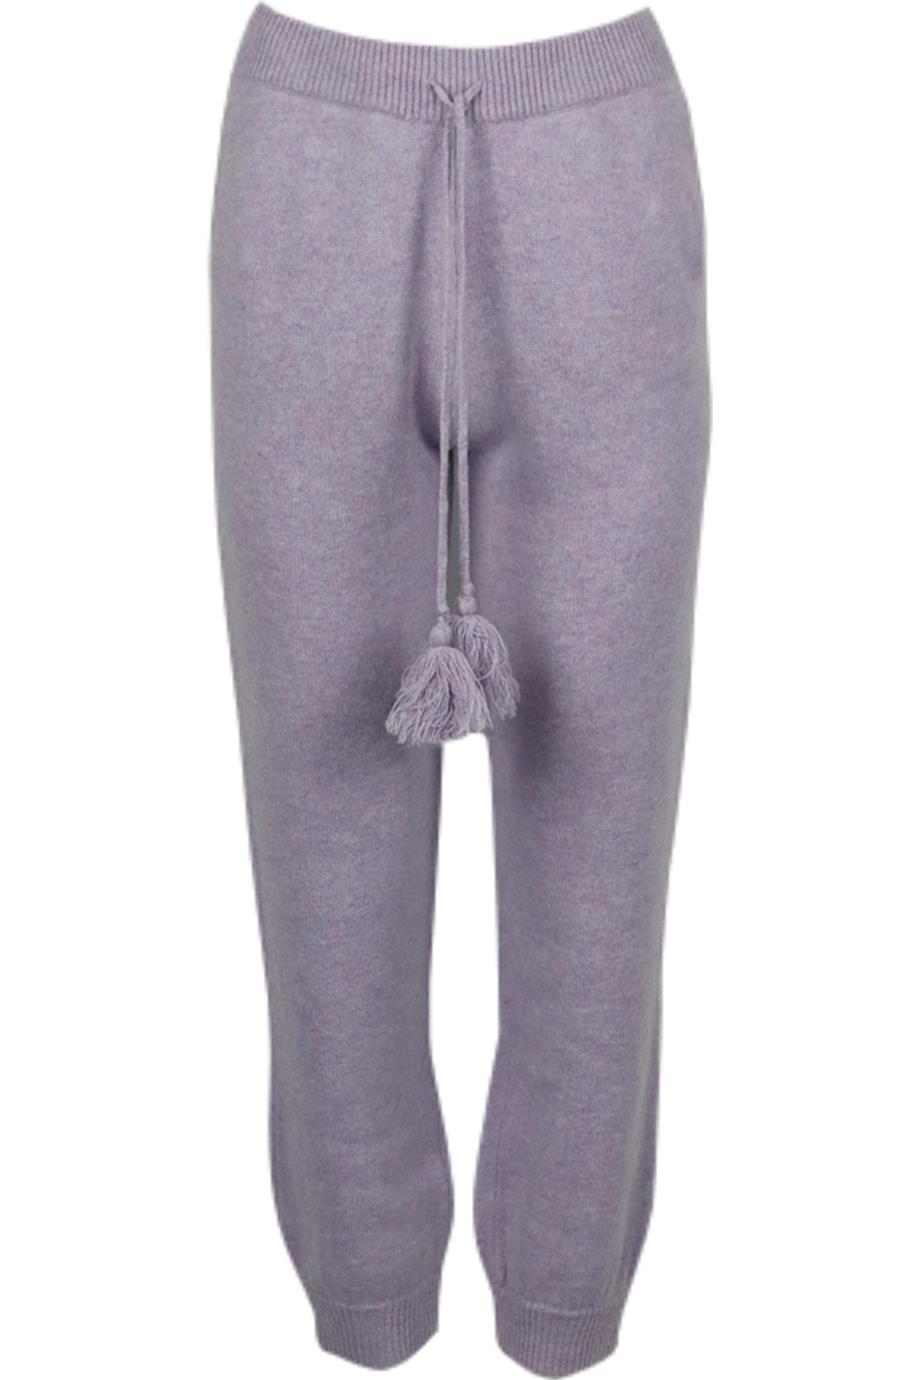 LOVESHACKFANCY WOOL AND CASHMERE BLEND TRACK PANTS SMALL